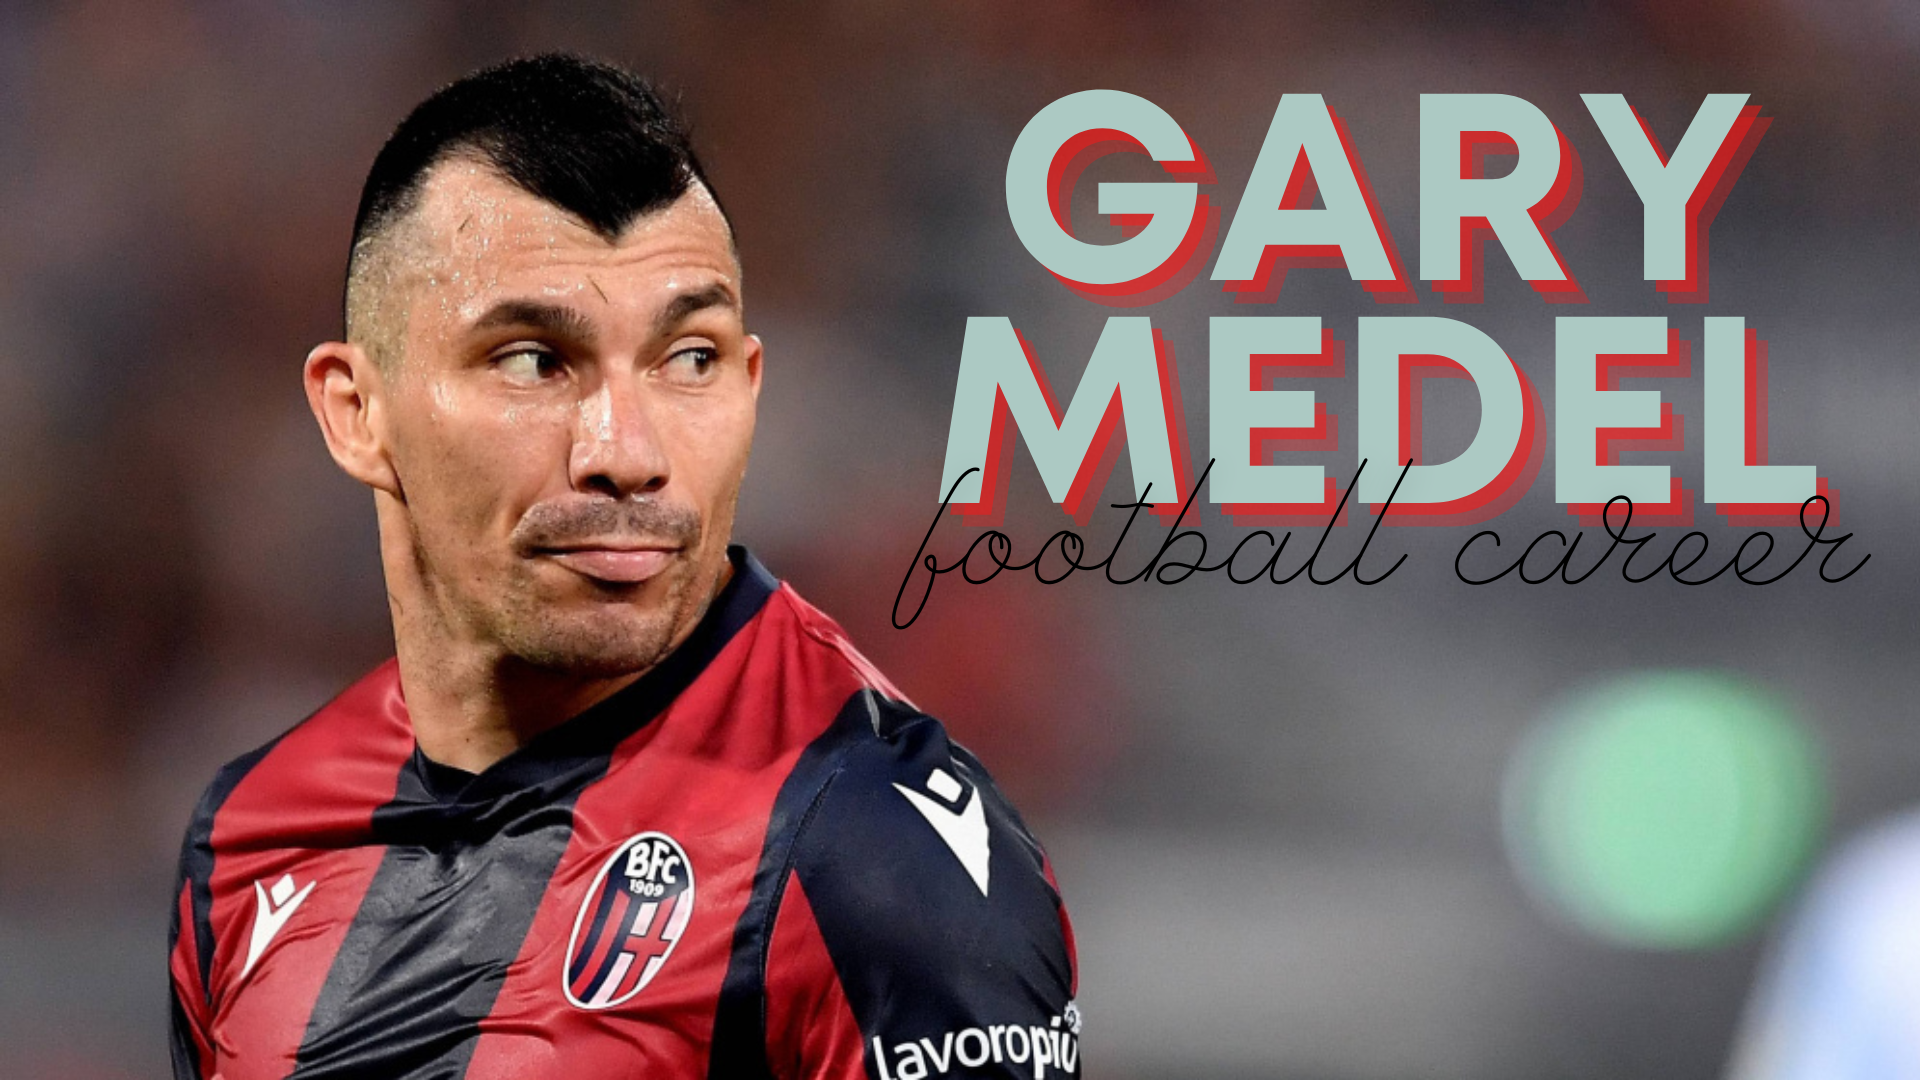 Gary medel standing while wearing colored black and red soccer uniform